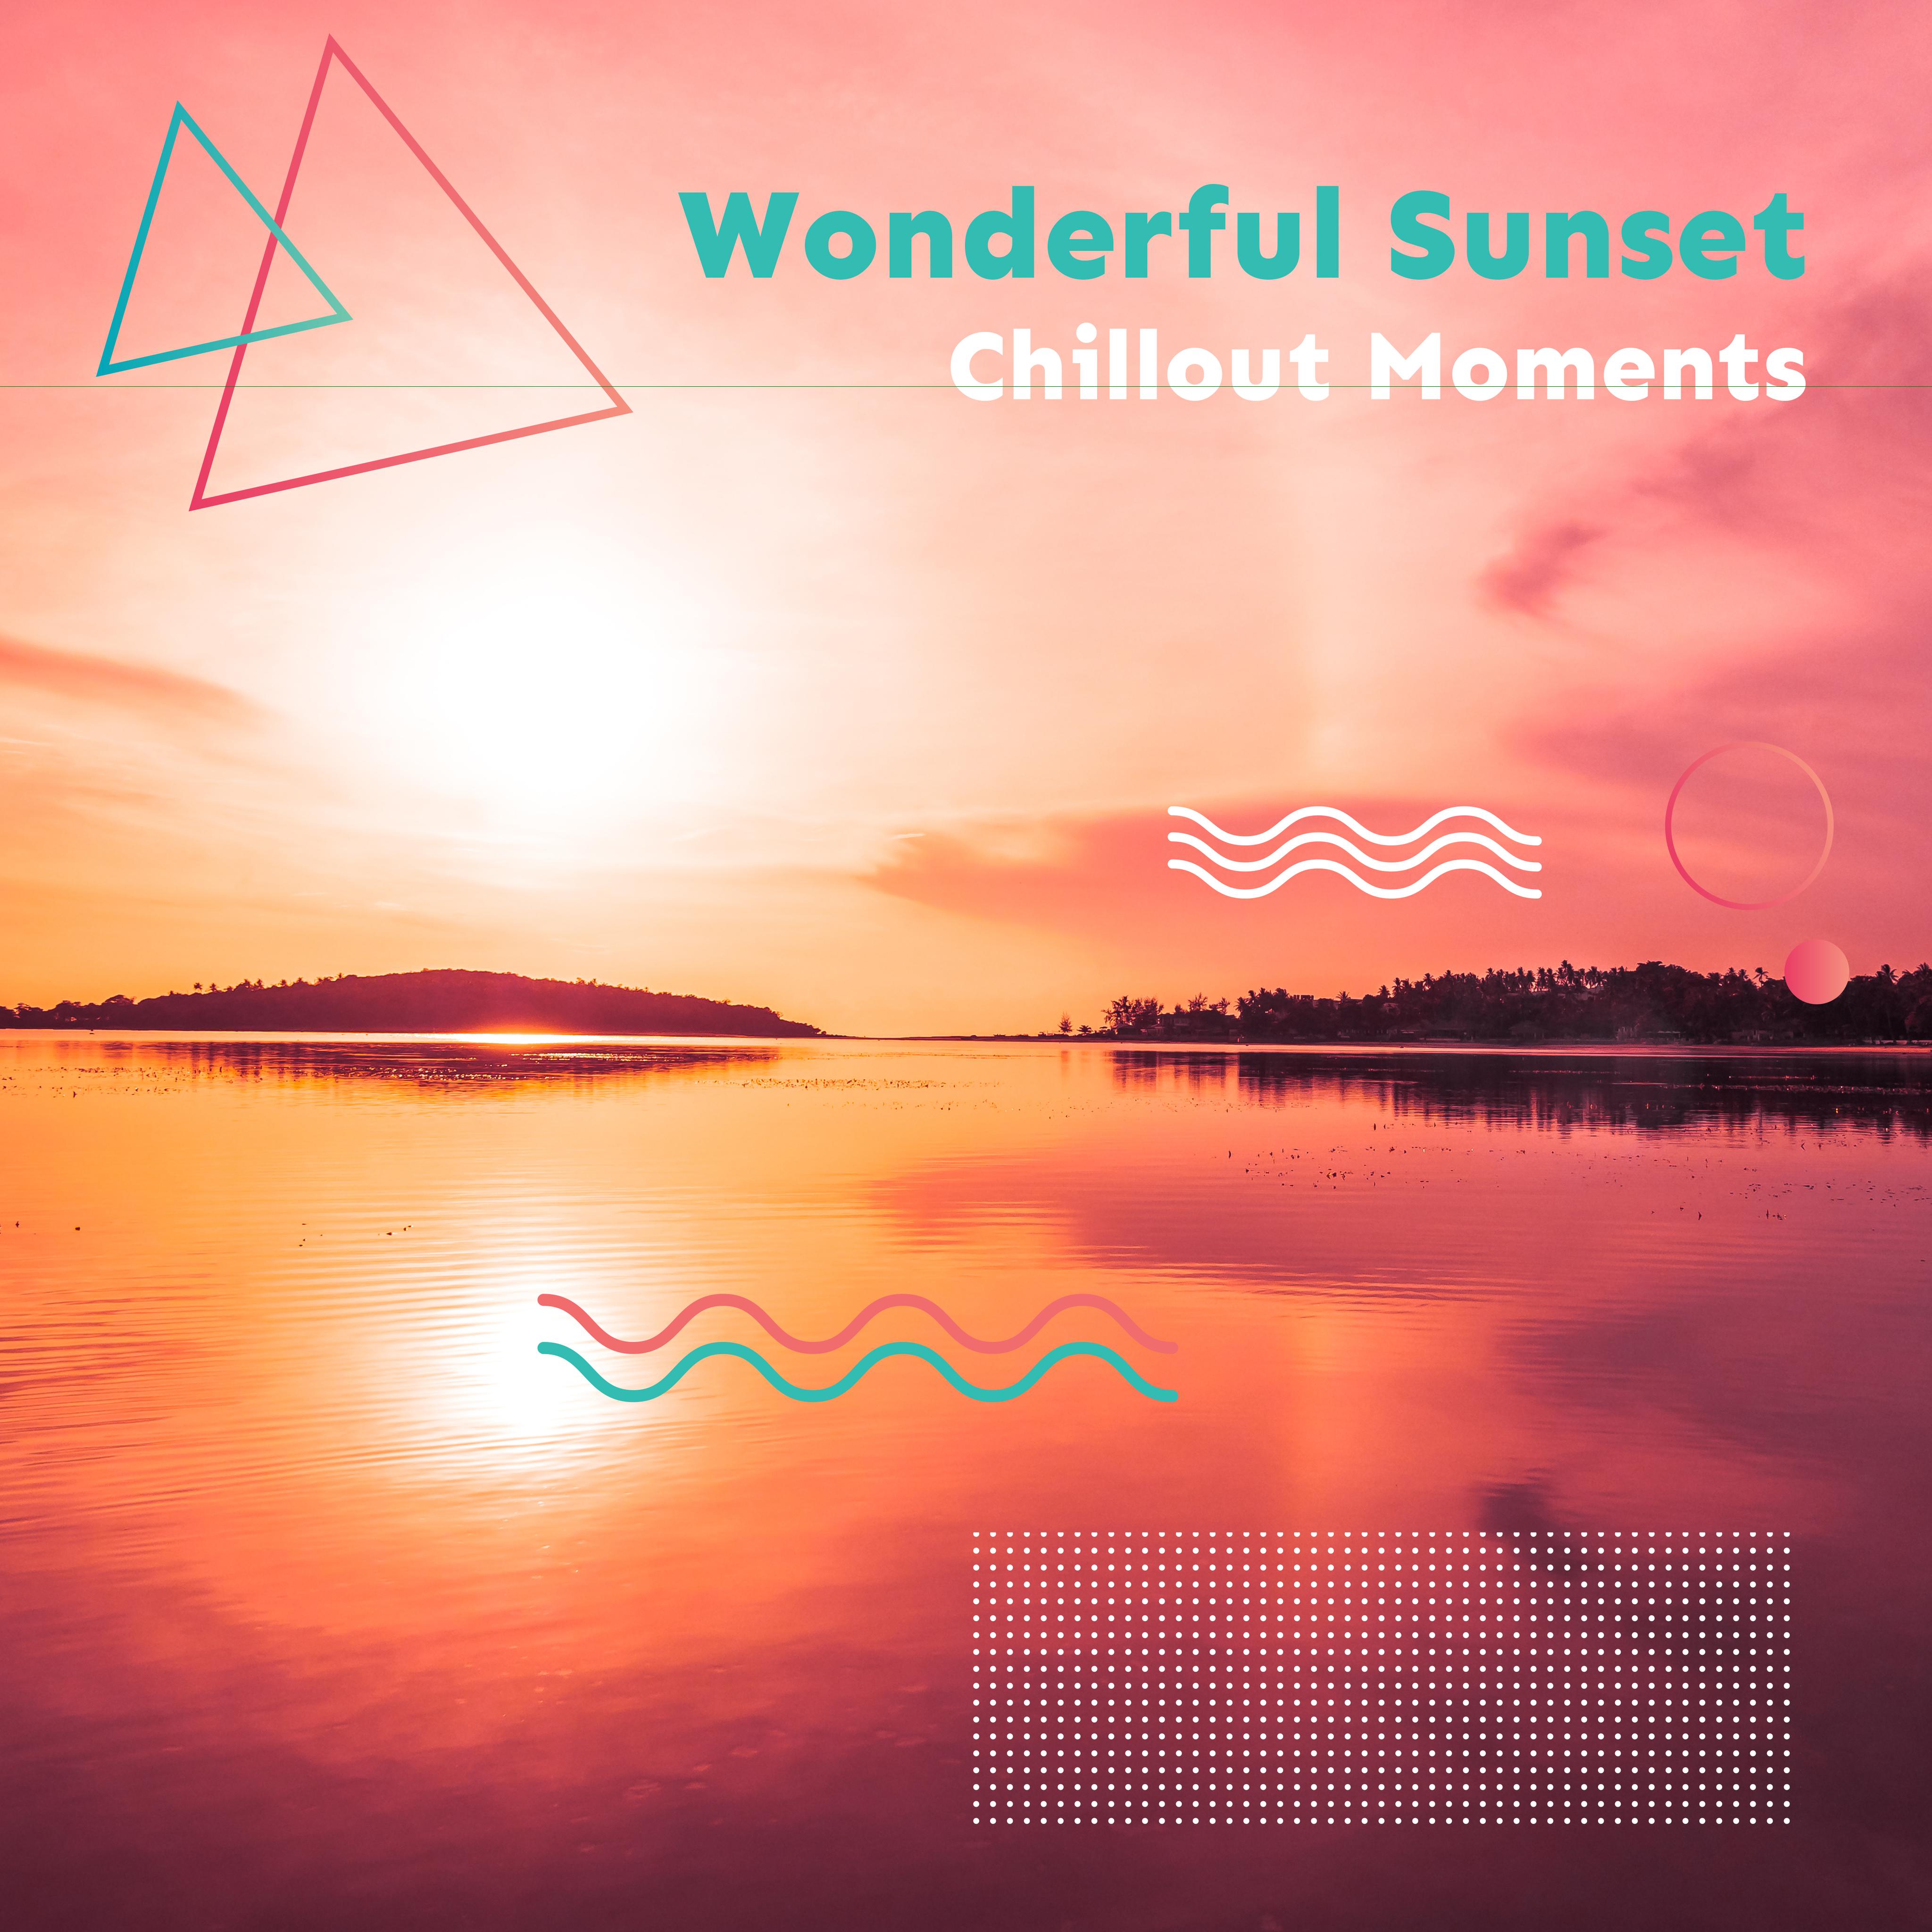 Wonderful Sunset Chillout Moments: 2019 Ekectronic Smooth Chill Out Music Collection for Total Summer Relaxation, Lying on the Beach, Sun Bathing, Drinking Fruit Cocktails Calm Down & Rest